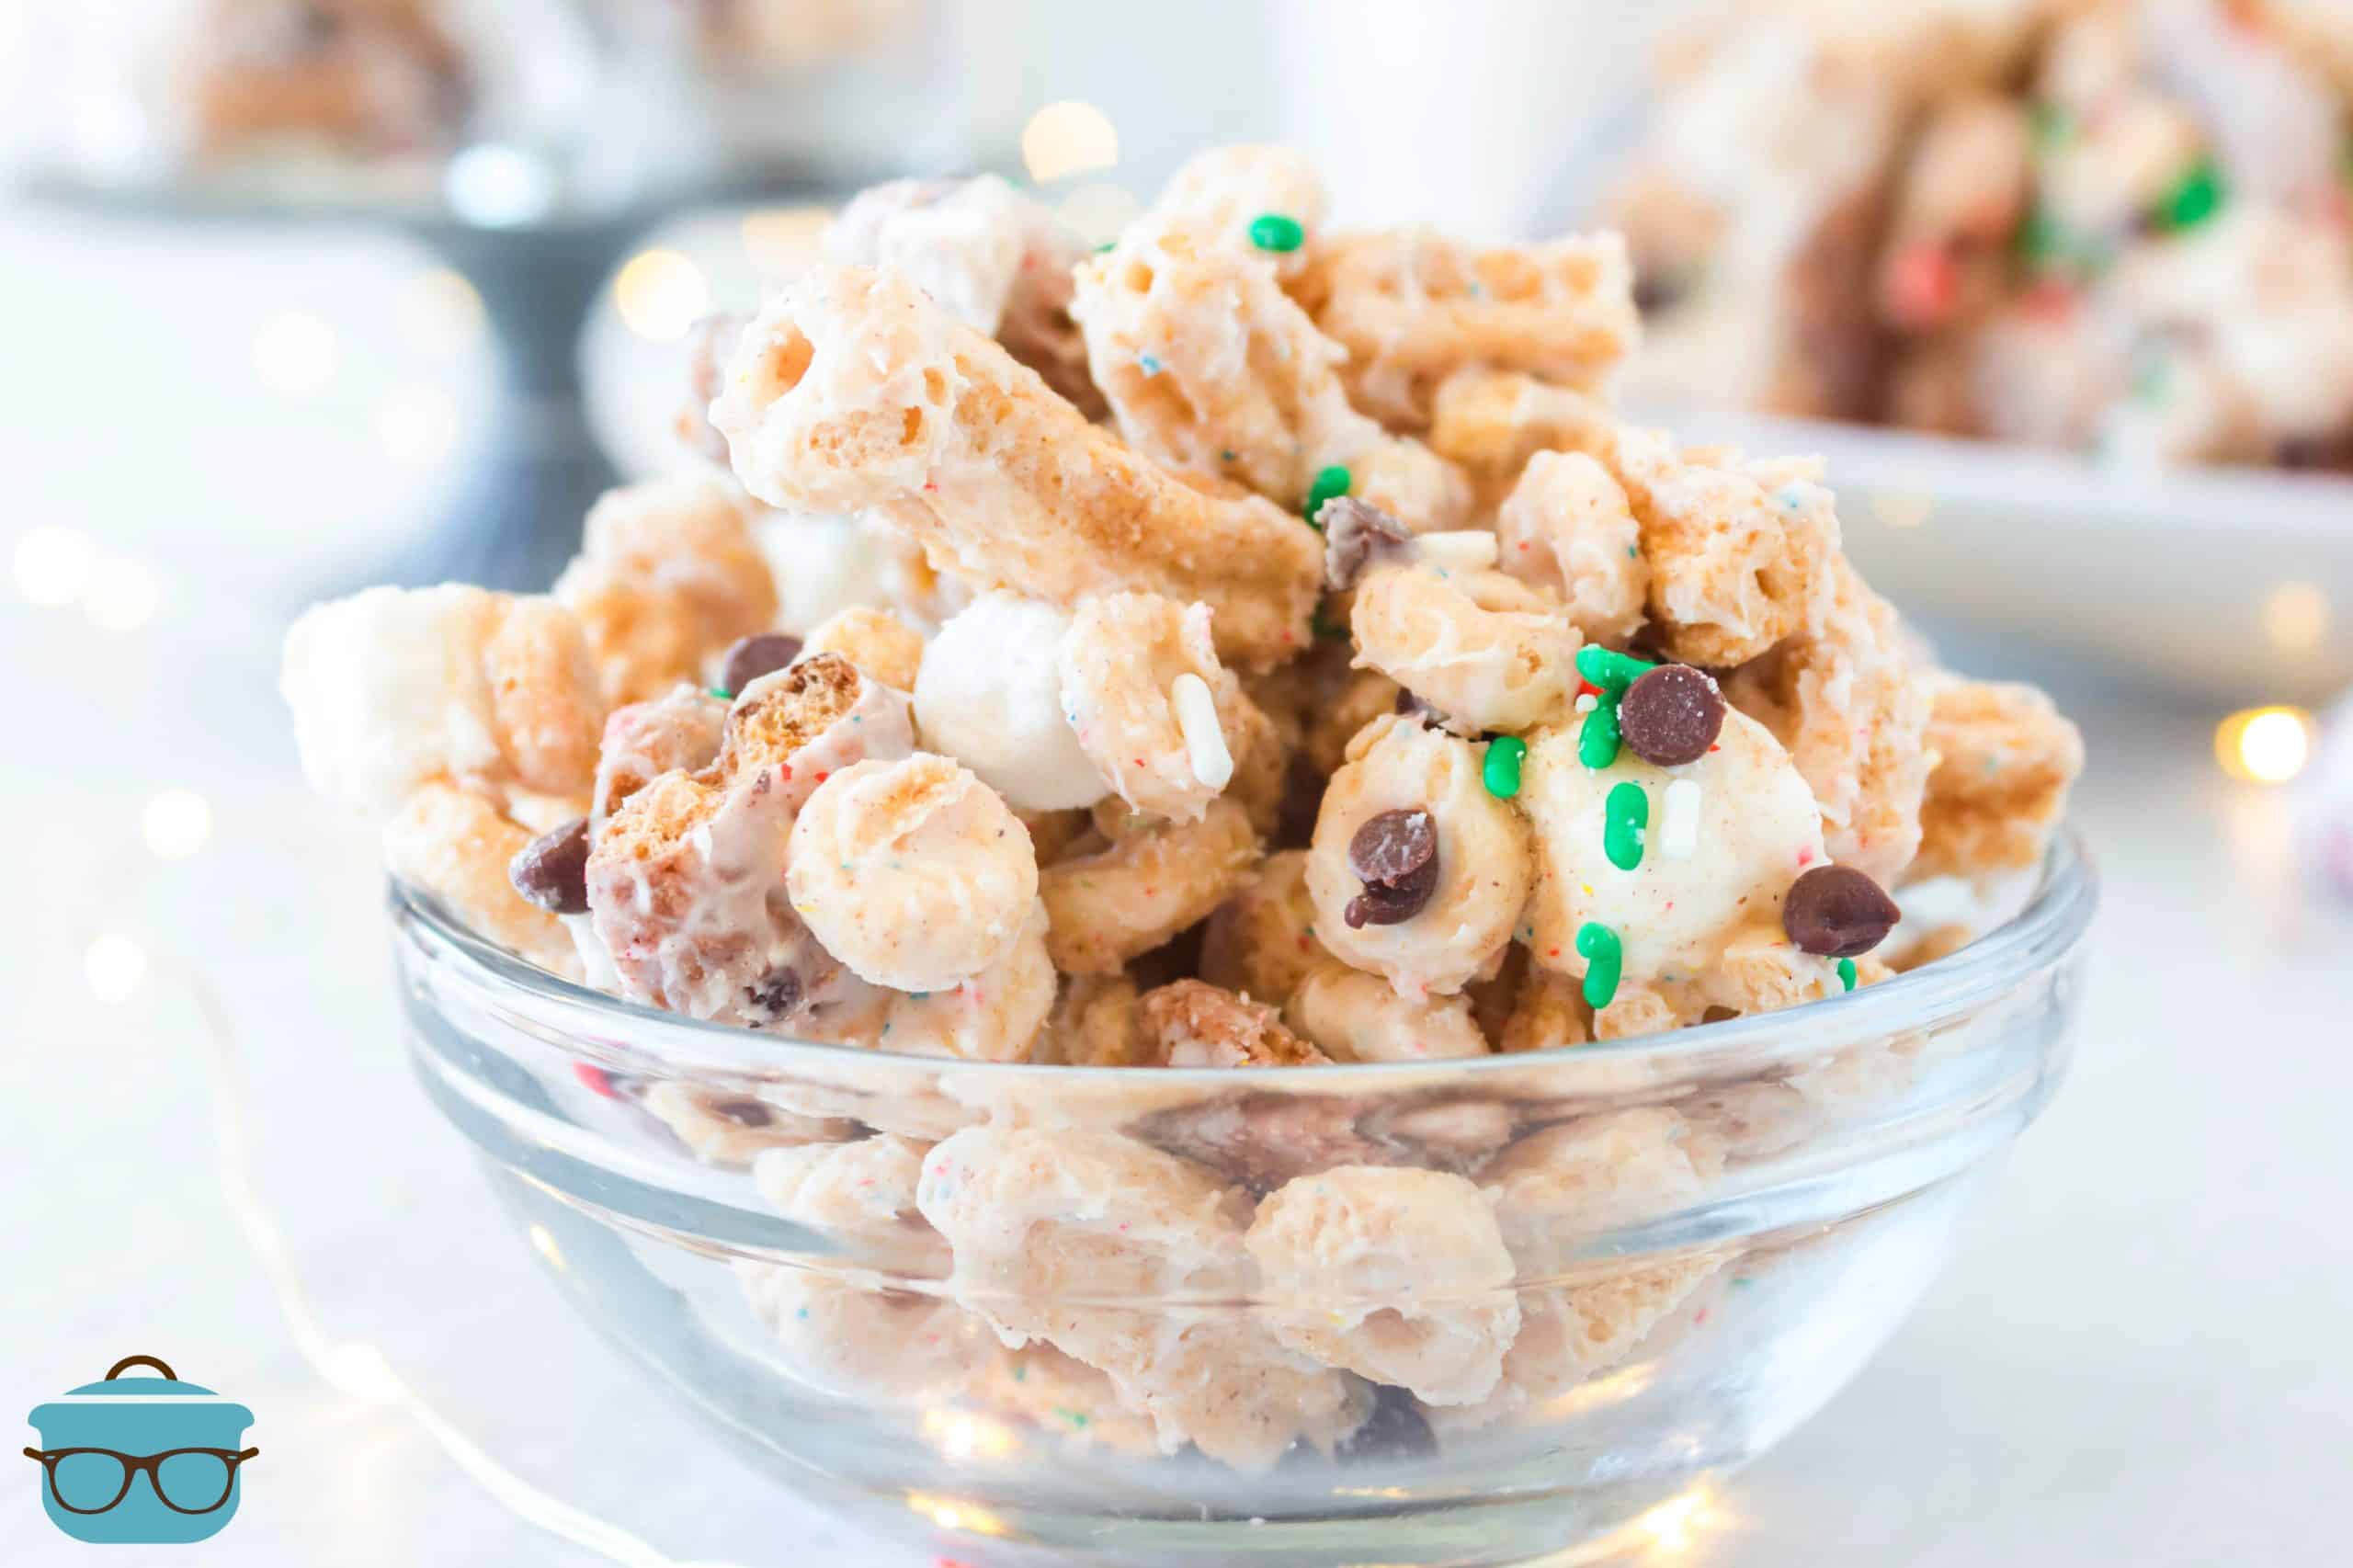 Elf Bait Snack Mix made with cereal with white chocolate in a small clear glass bowl.